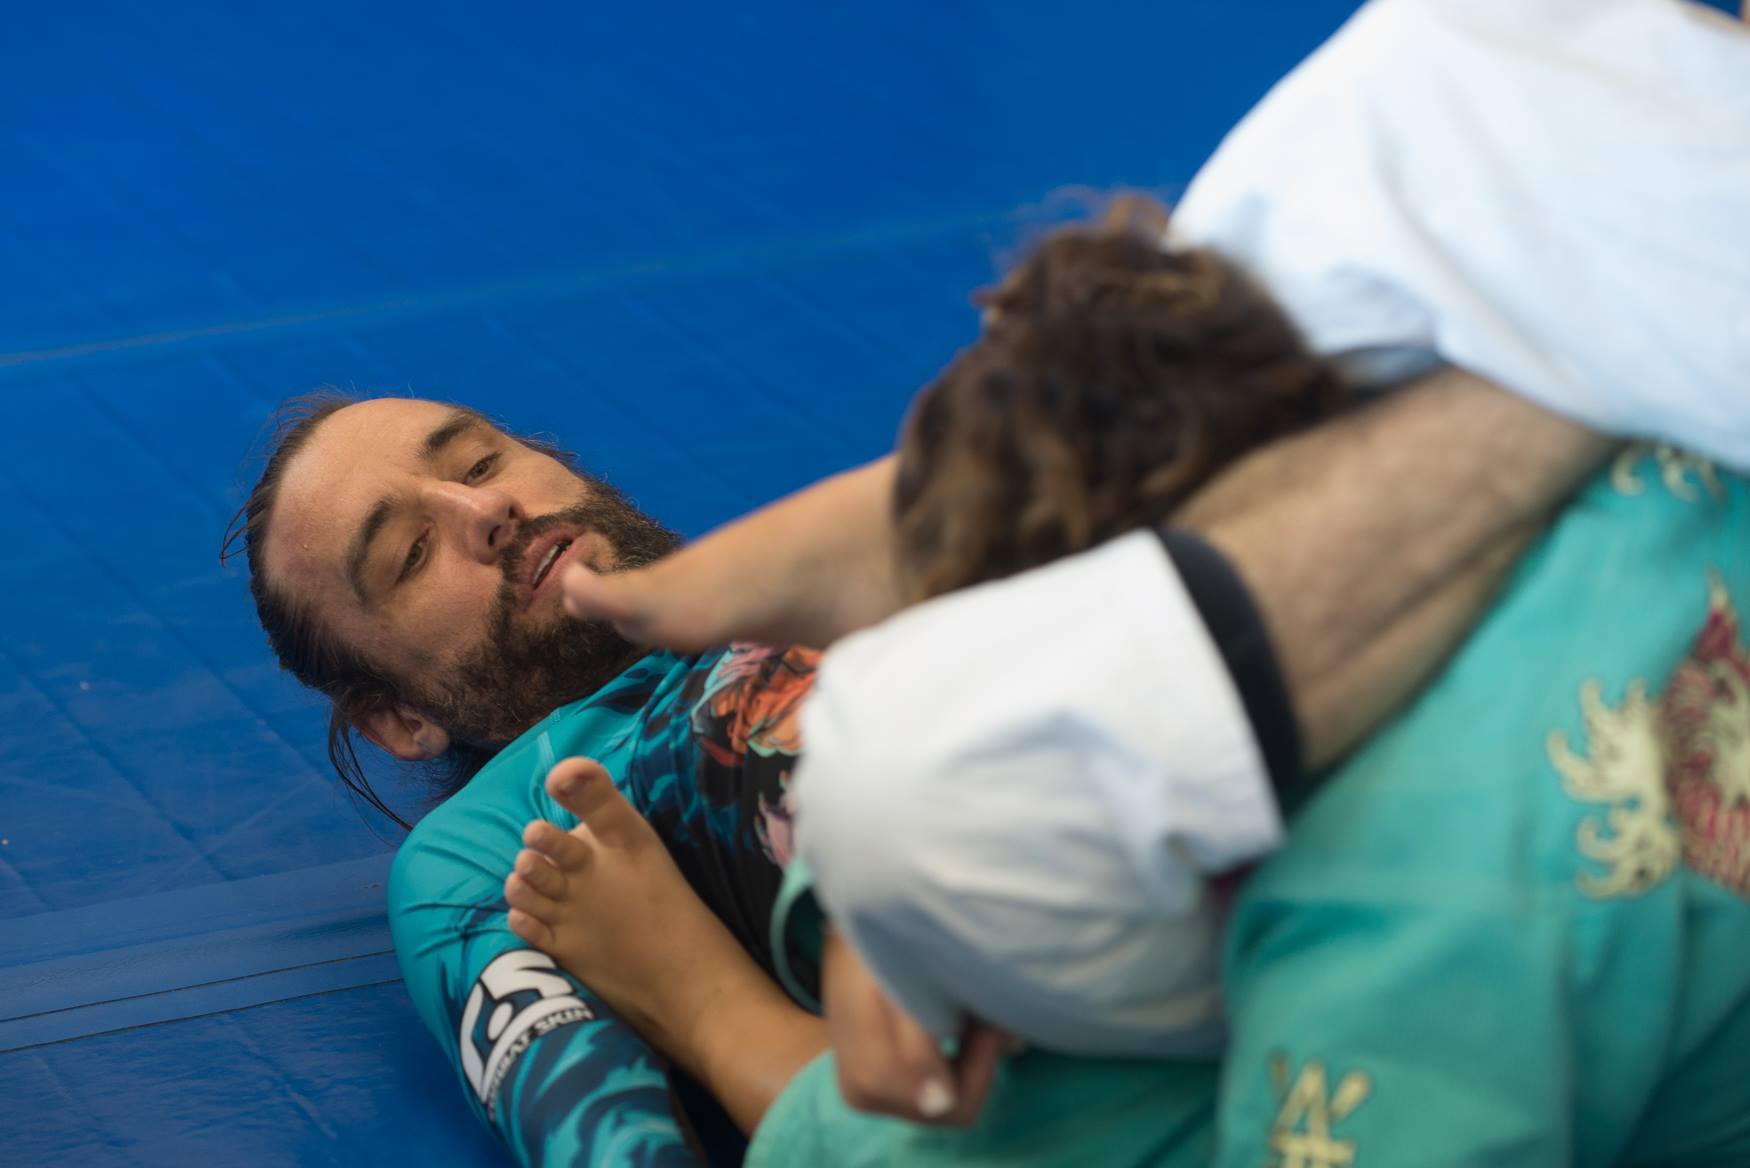 How to “Flow”: Cyclical Flow Drills for BJJ